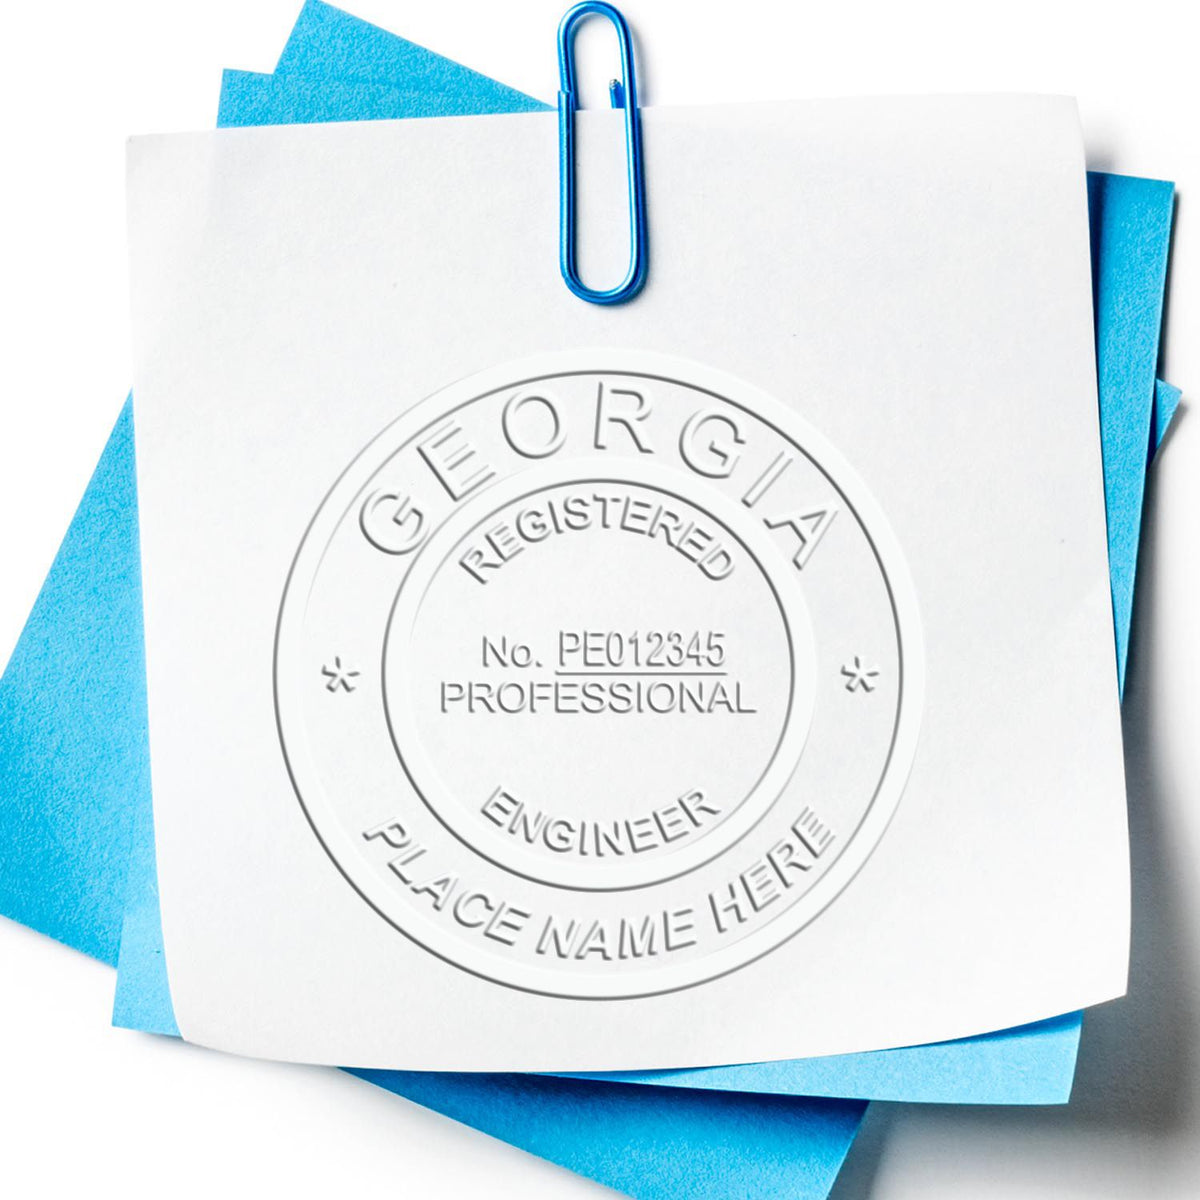 A photograph of the Soft Georgia Professional Engineer Seal stamp impression reveals a vivid, professional image of the on paper.